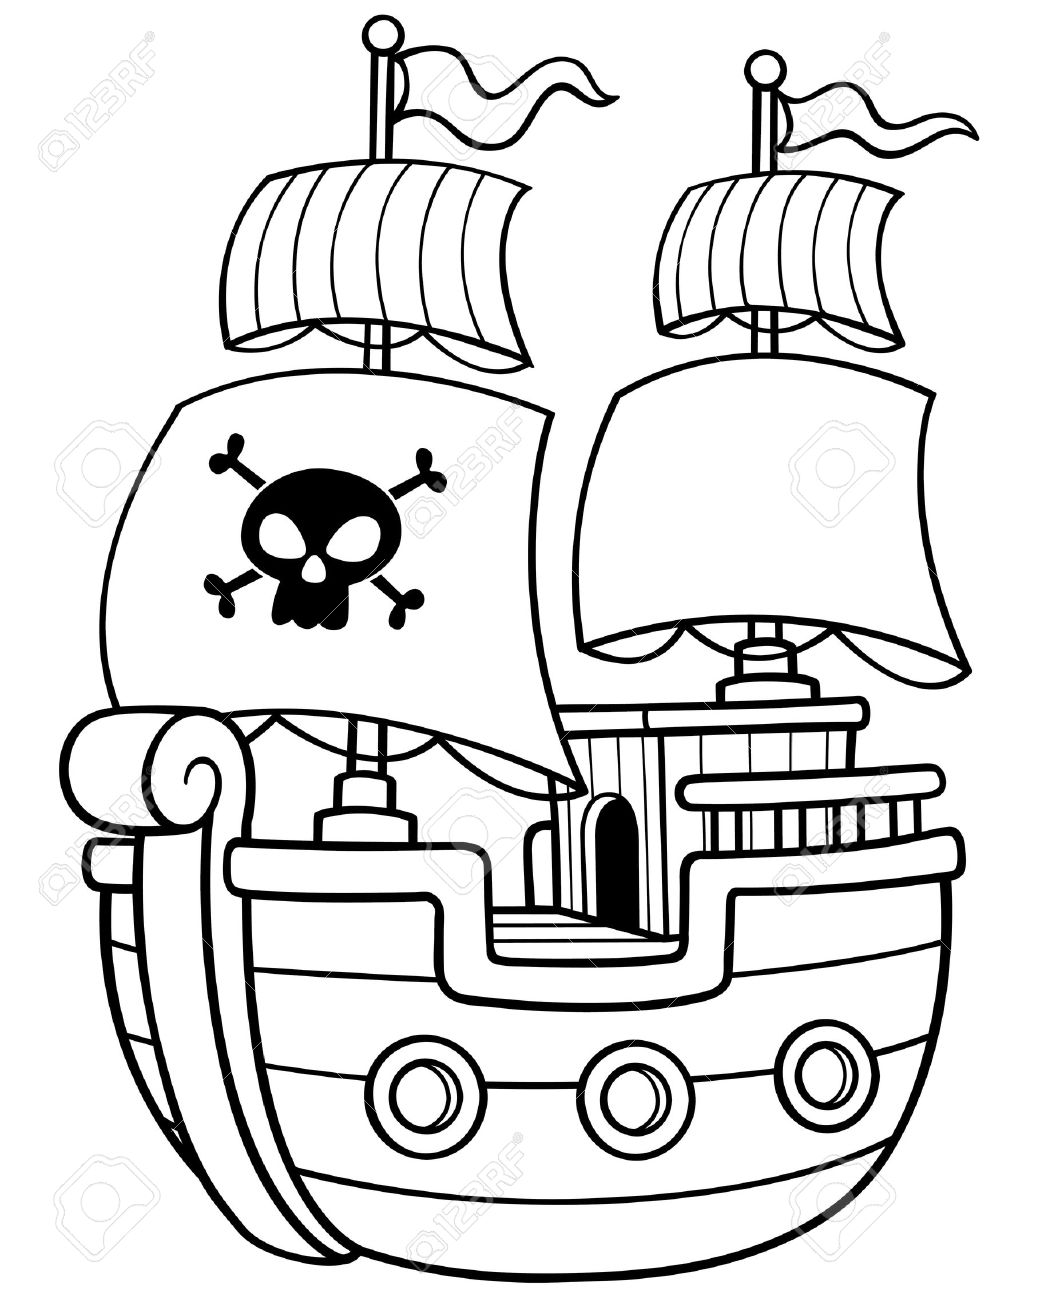 Vector illustration of pirate ship coloring book royalty free svg cliparts vectors and stock illustration image